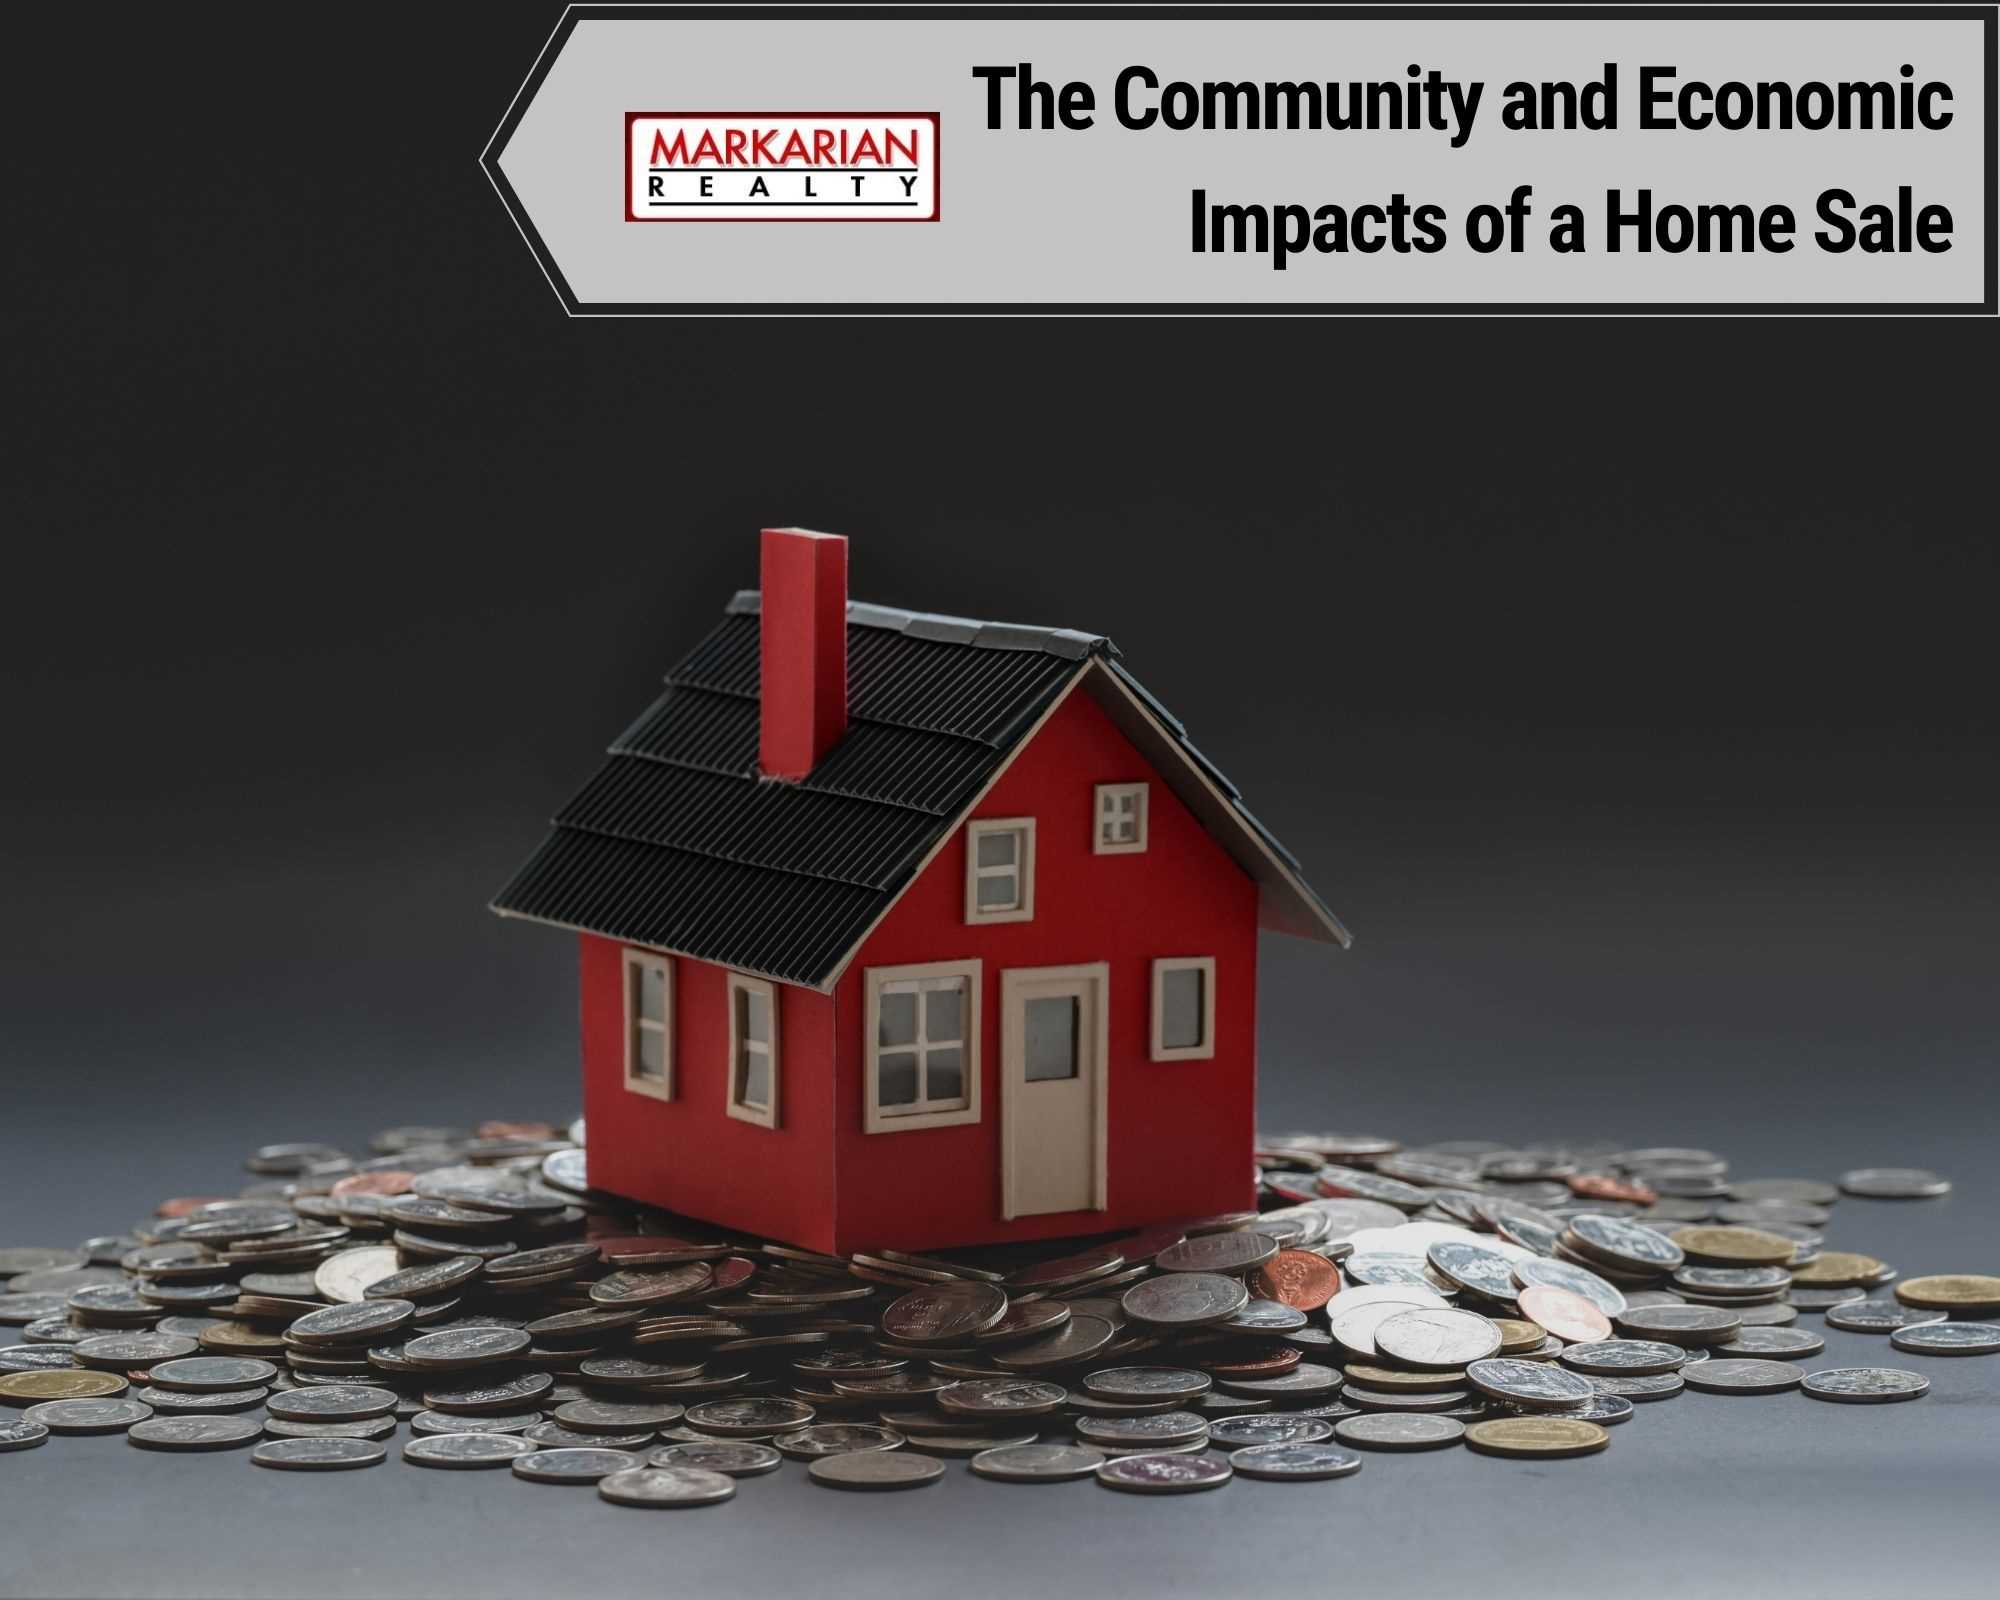 The Community and Economic Impacts of a Home Sale